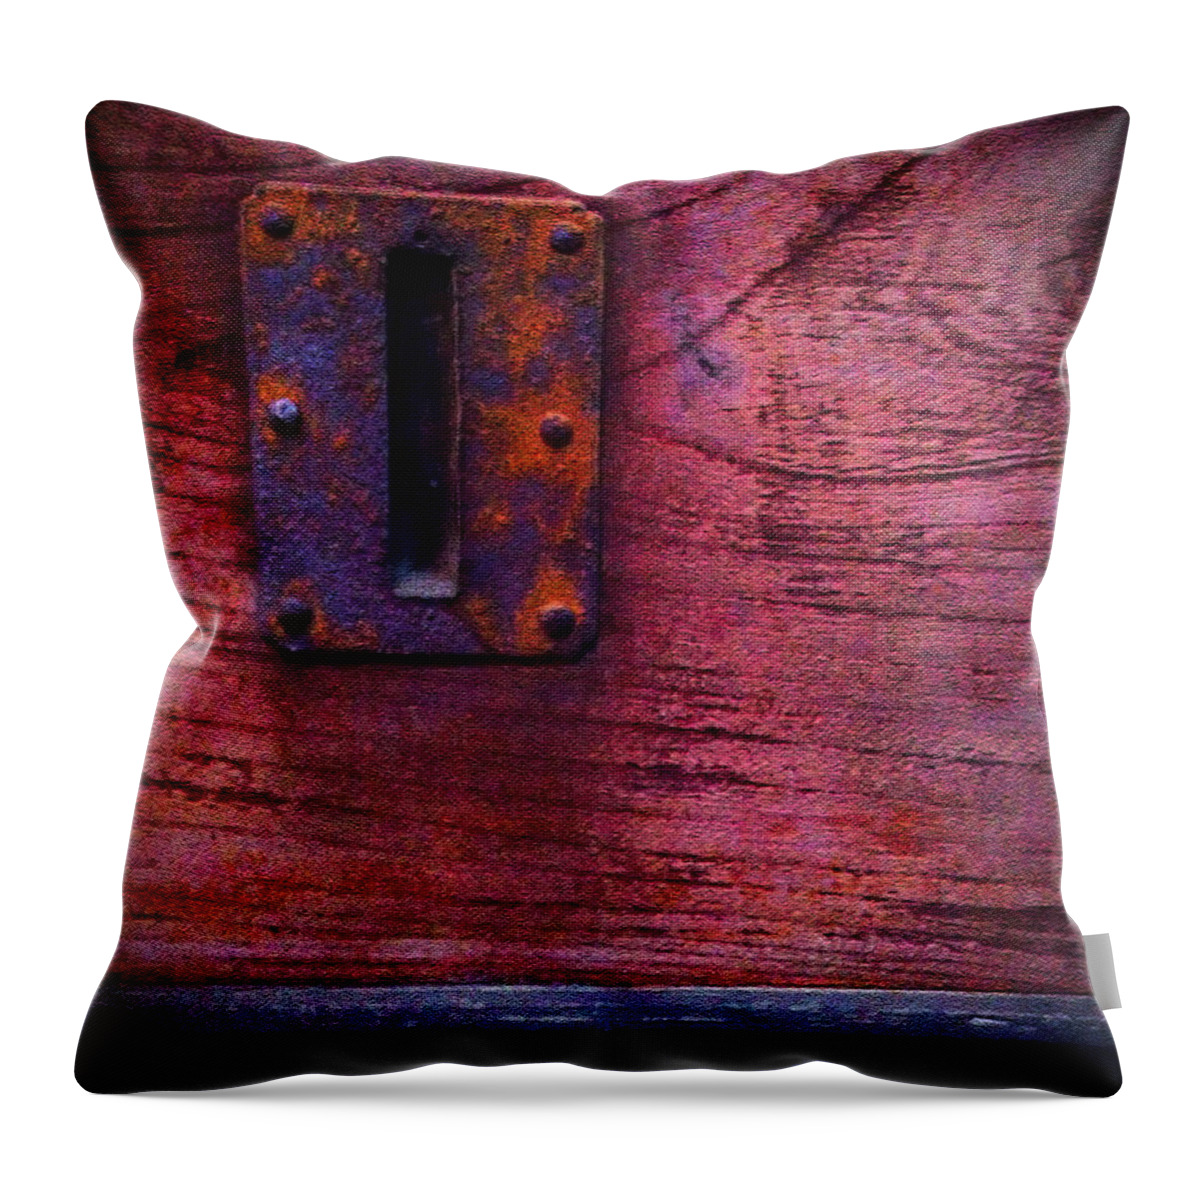  Throw Pillow featuring the photograph Secrets by Eena Bo